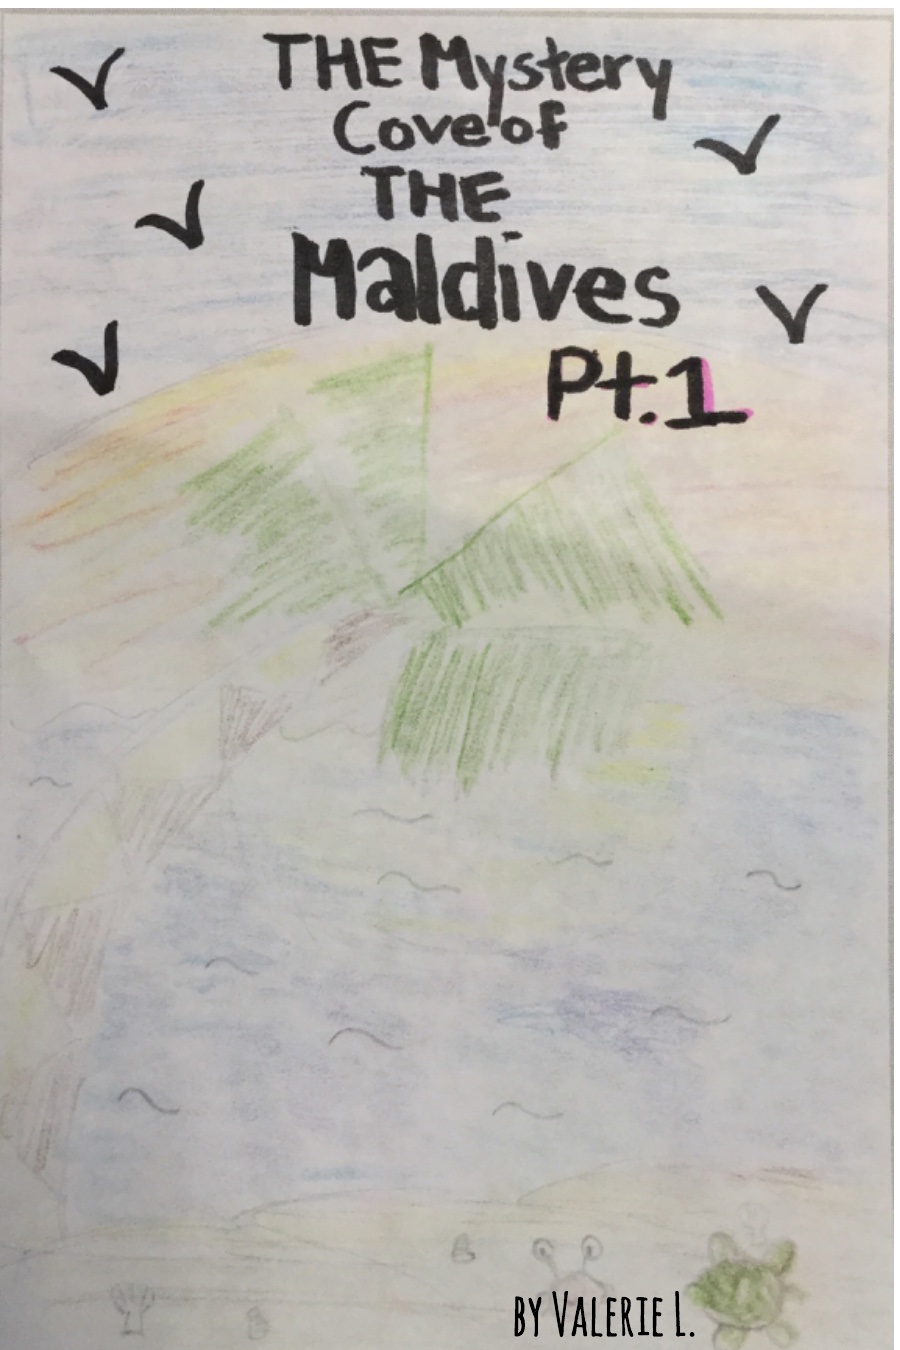 Mystery Cove of the Maldives part 1 by Valerie L